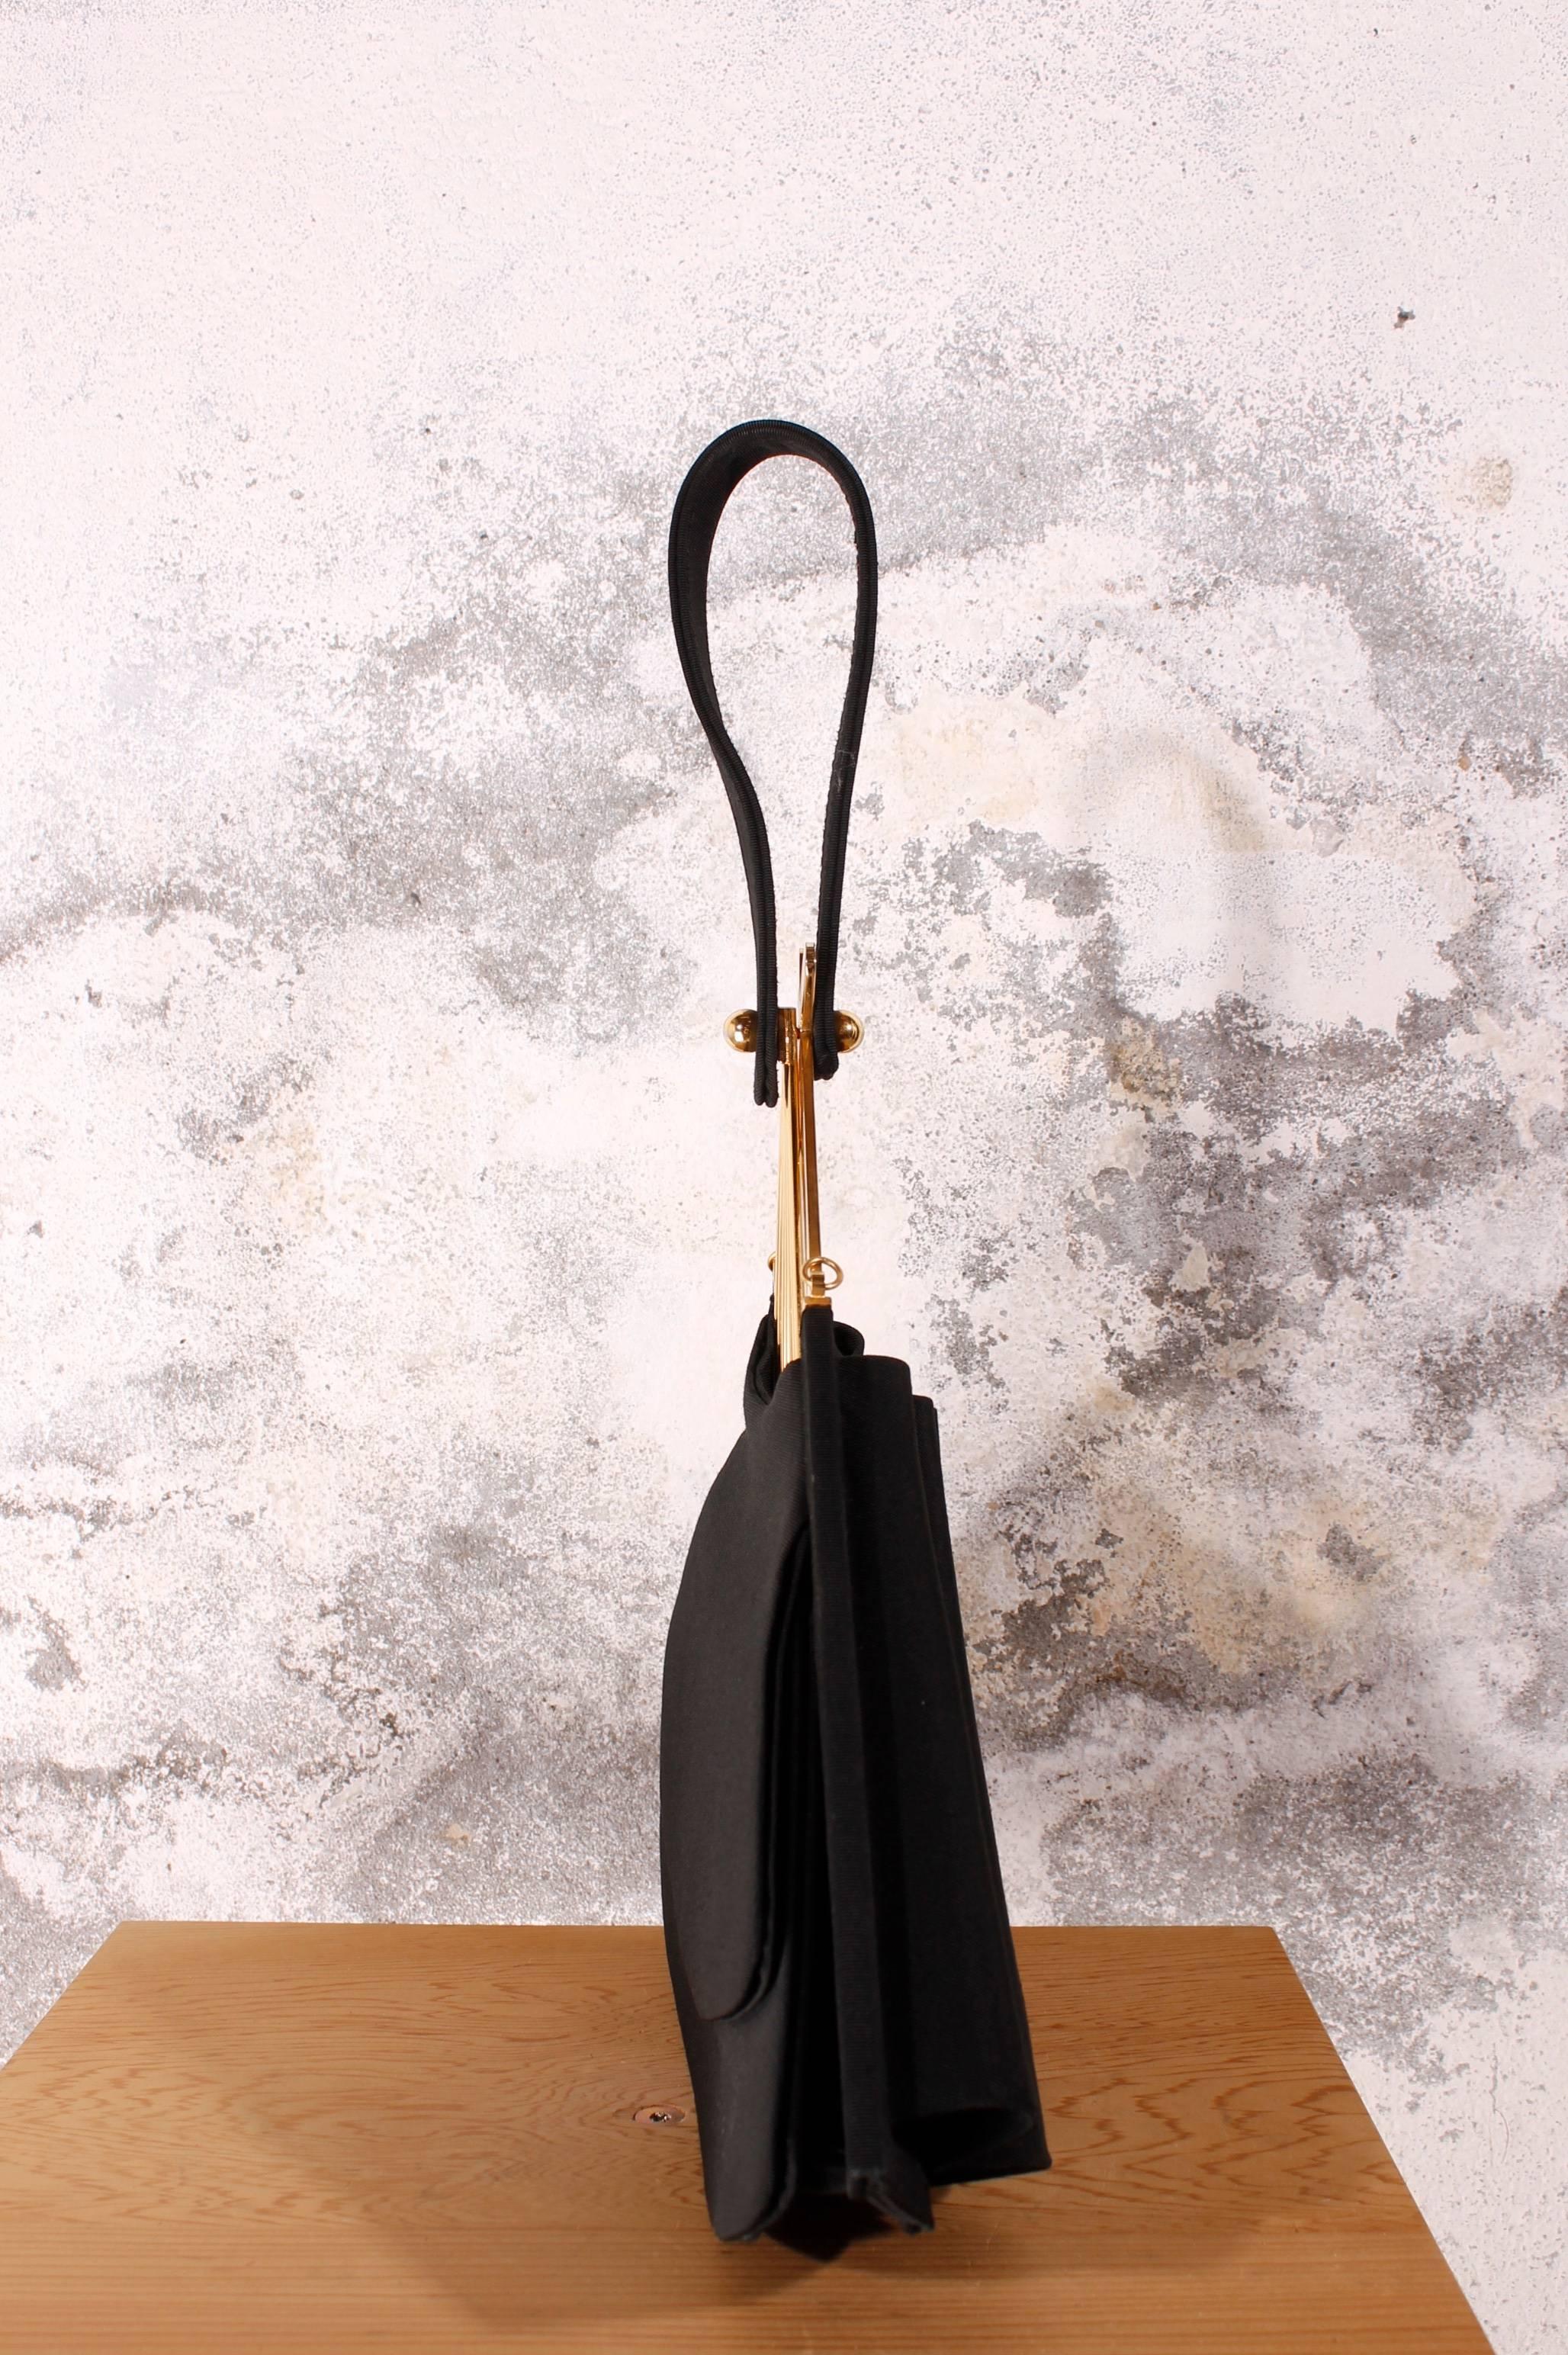 This KARL LAGERFELD beauty is a 100% authentic vintage collectors item from the 1980s.

The black satin fan handbag from KL can be used as a glamorous evening bag, It is made of black satin and has golden details.

One of the most collectable